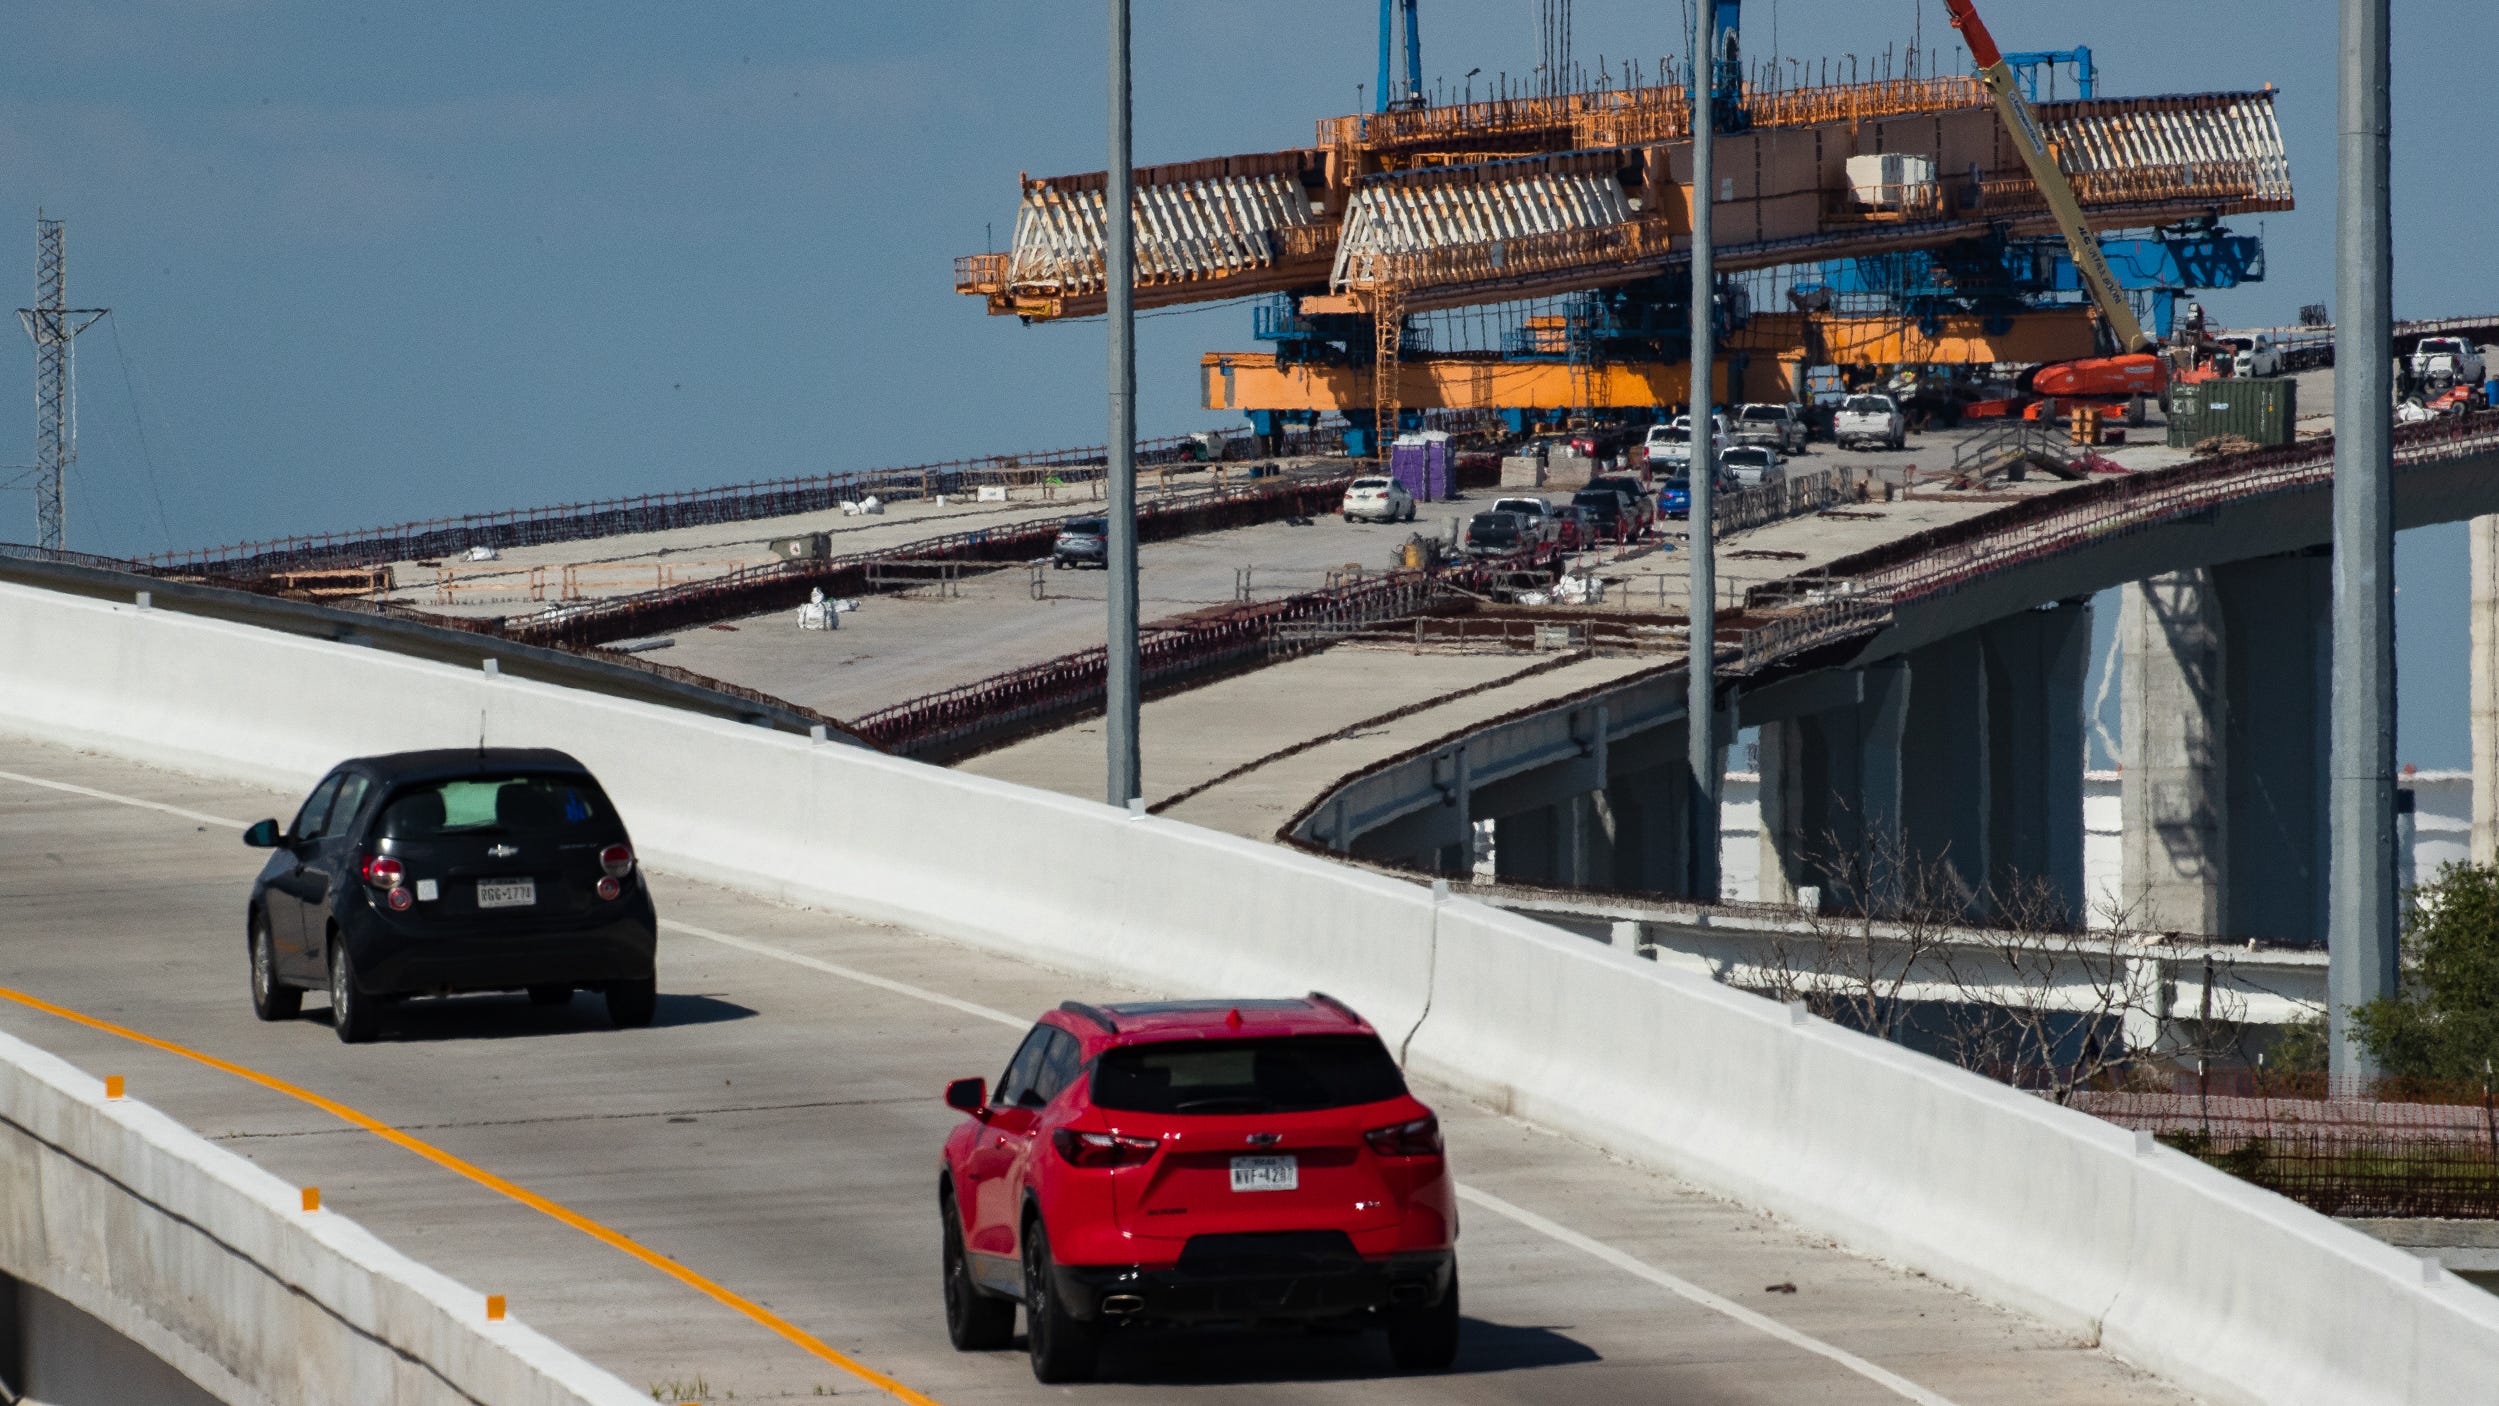 'Lessons learned': TxDOT briefs state lawmakers on stalled Harbor Bridge project